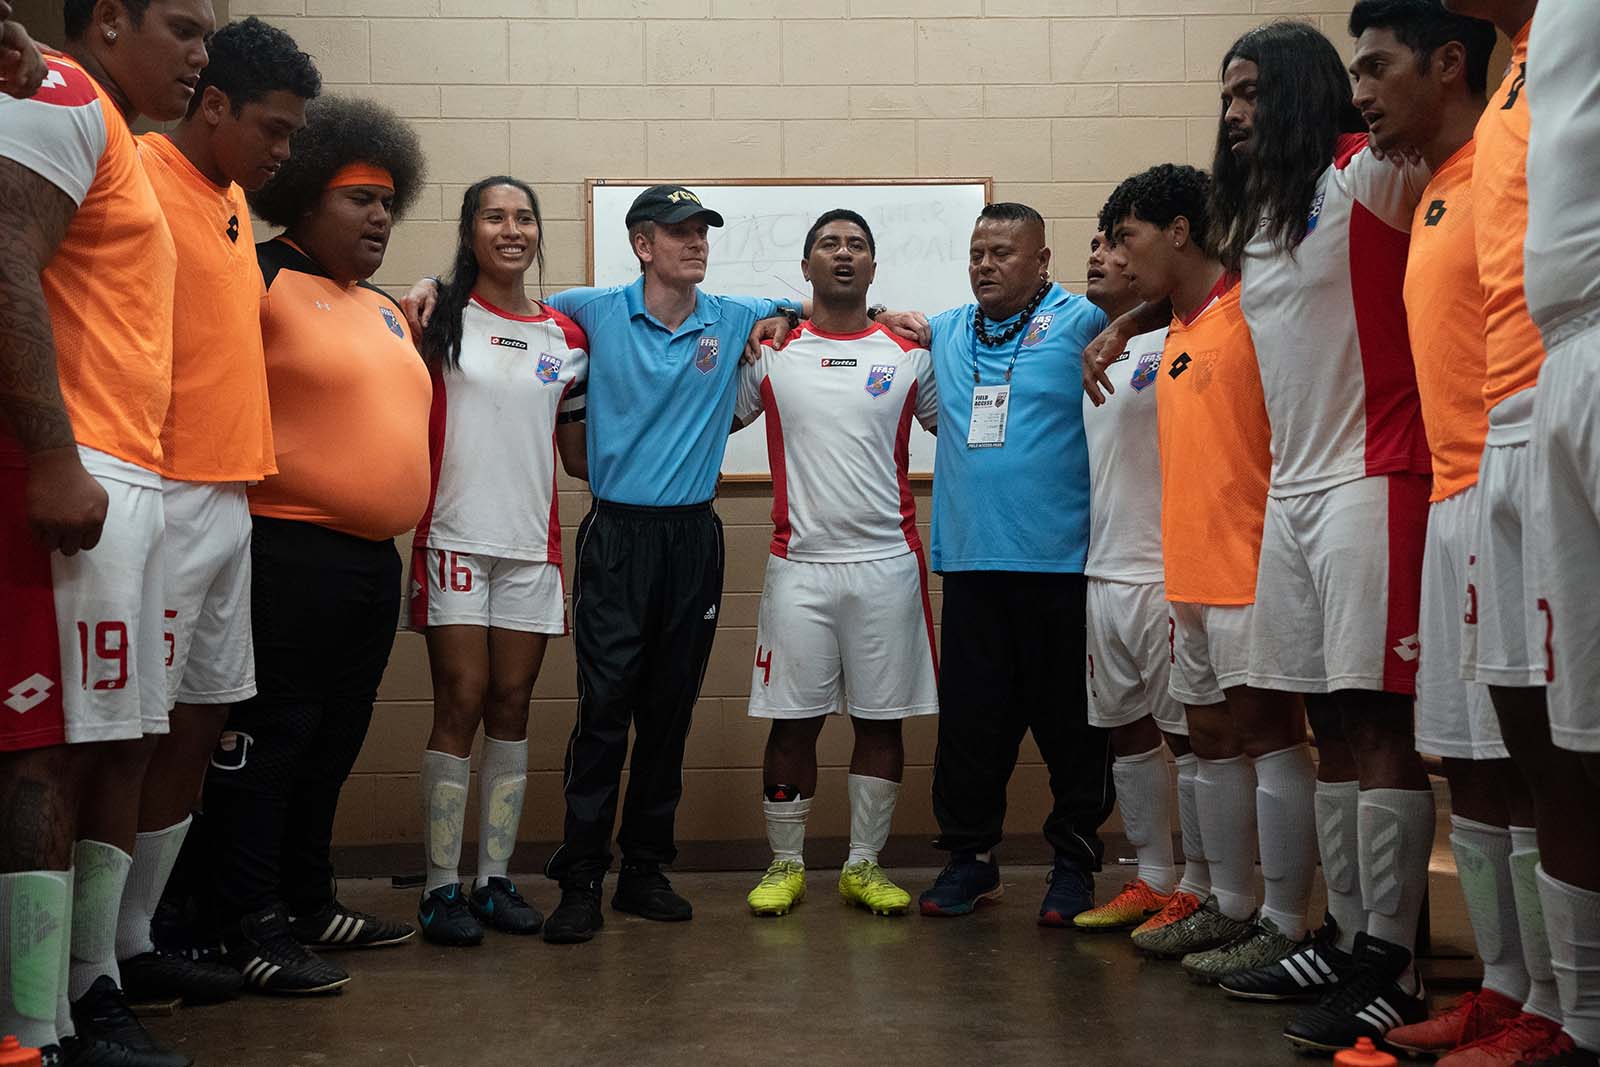 Next Goal Wins tells the story of the American Samoa team. Image © Searchlight Pictures